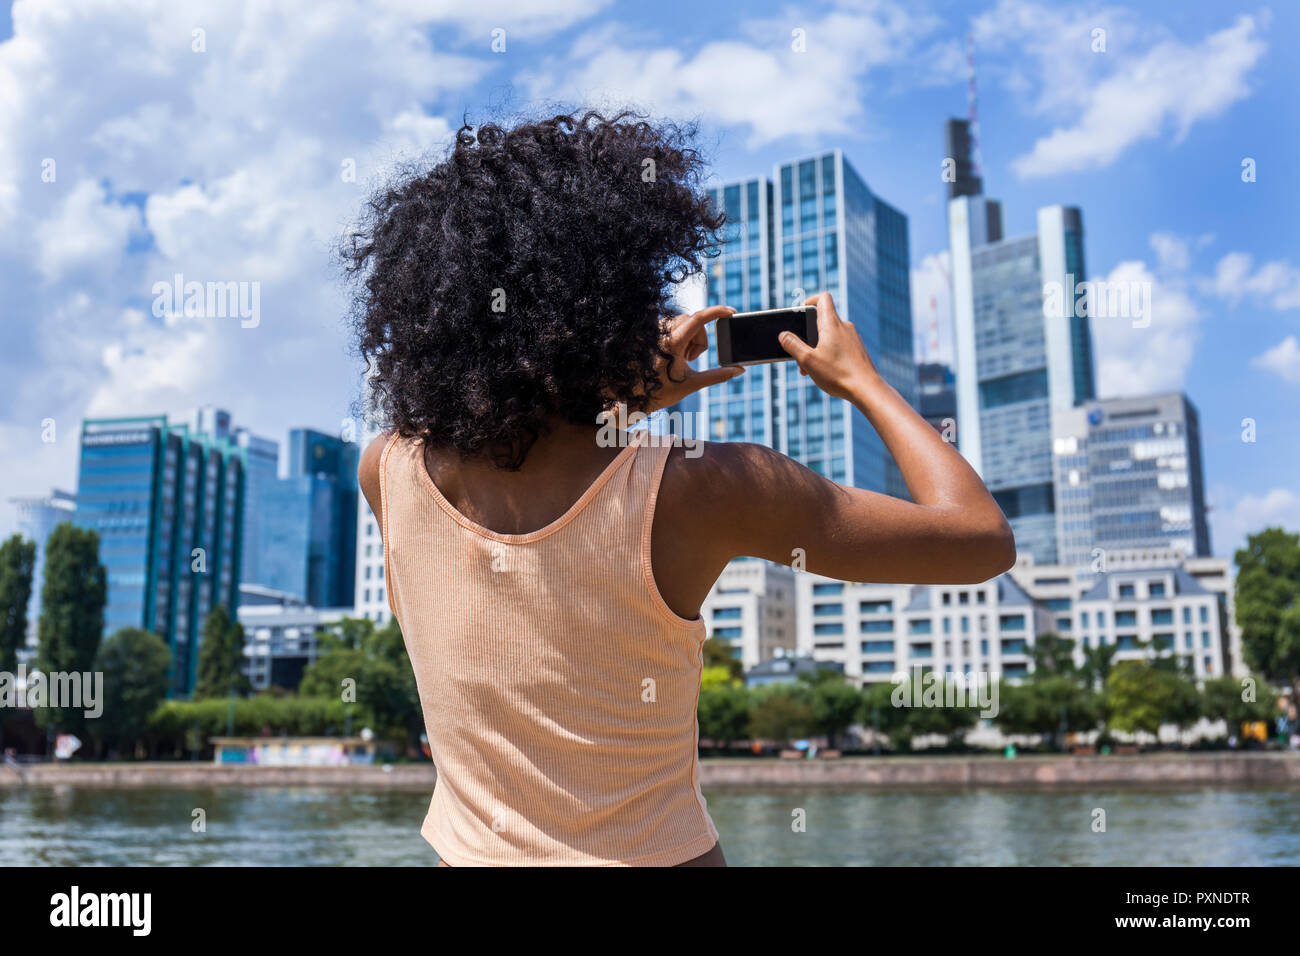 Germany, Frankfurt, back view of young woman with curly hair taking photo with smartphone Stock Photo